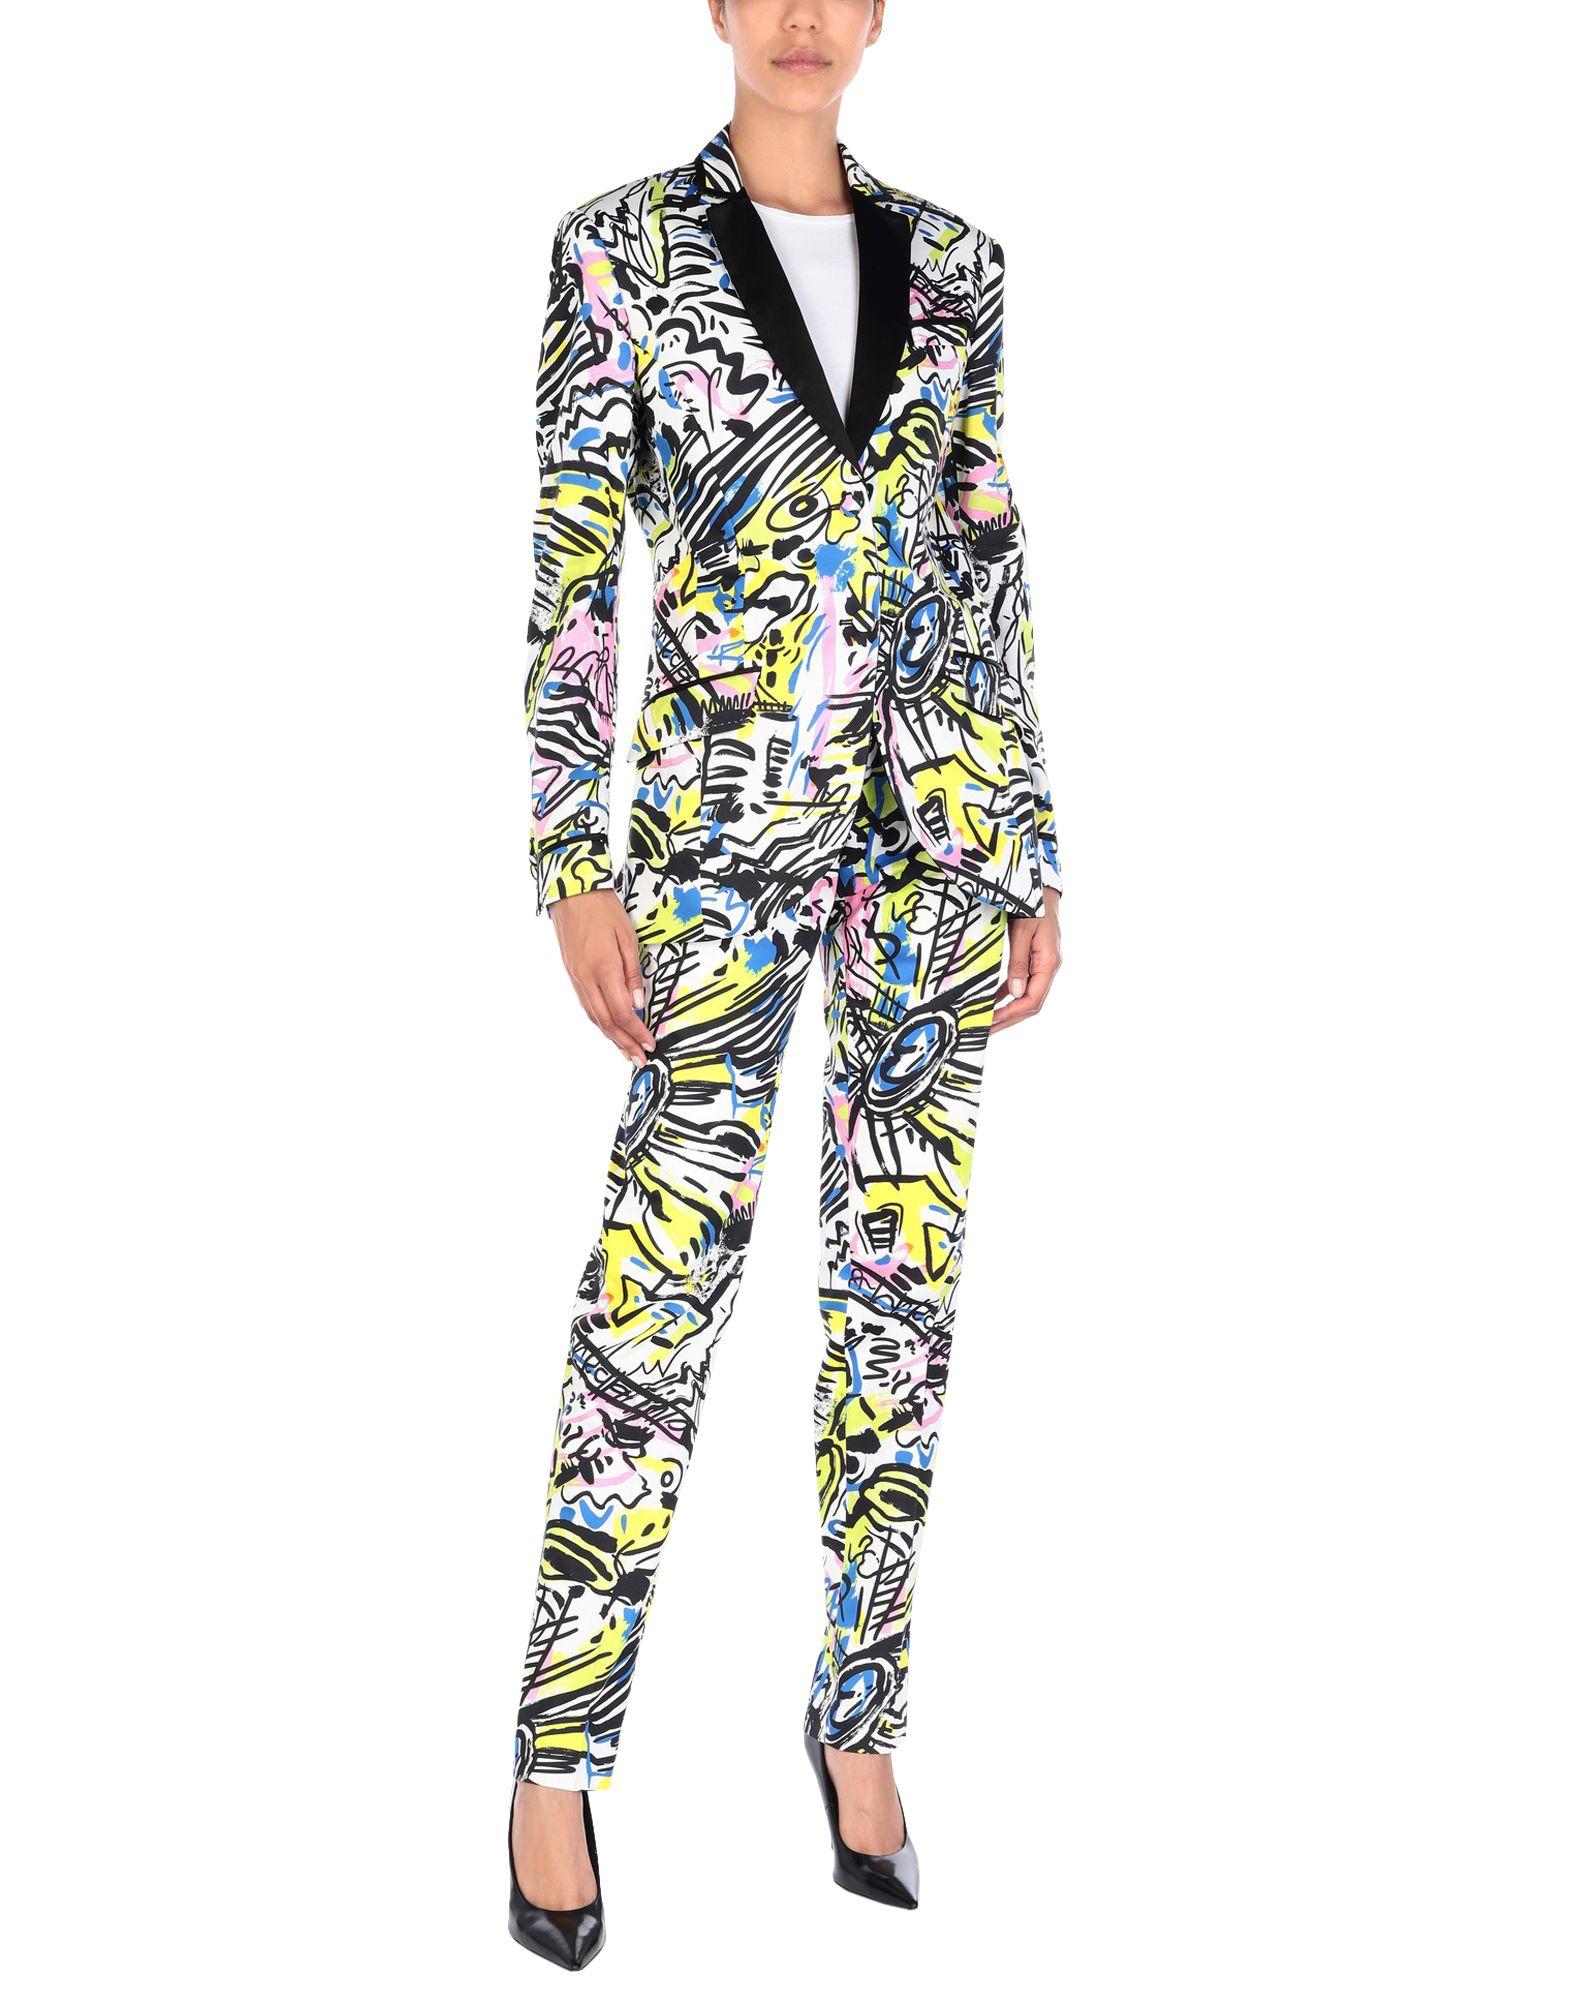 Moschino Satin Women's Suit in White - Lyst